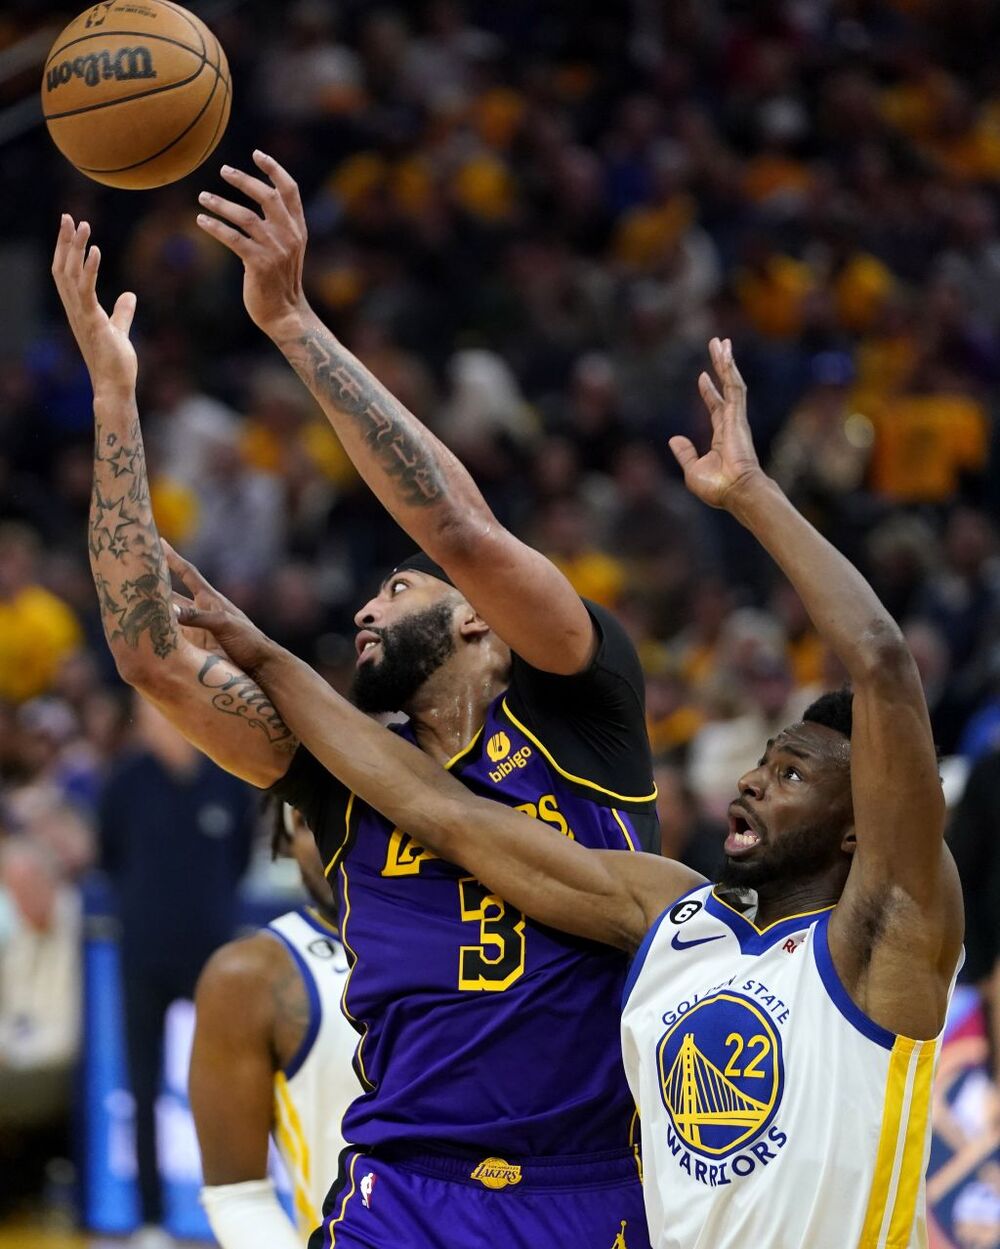 NBA Playoffs - Los Angeles Lakers at Golden State Warriors  / JOHN G. MABANGLO